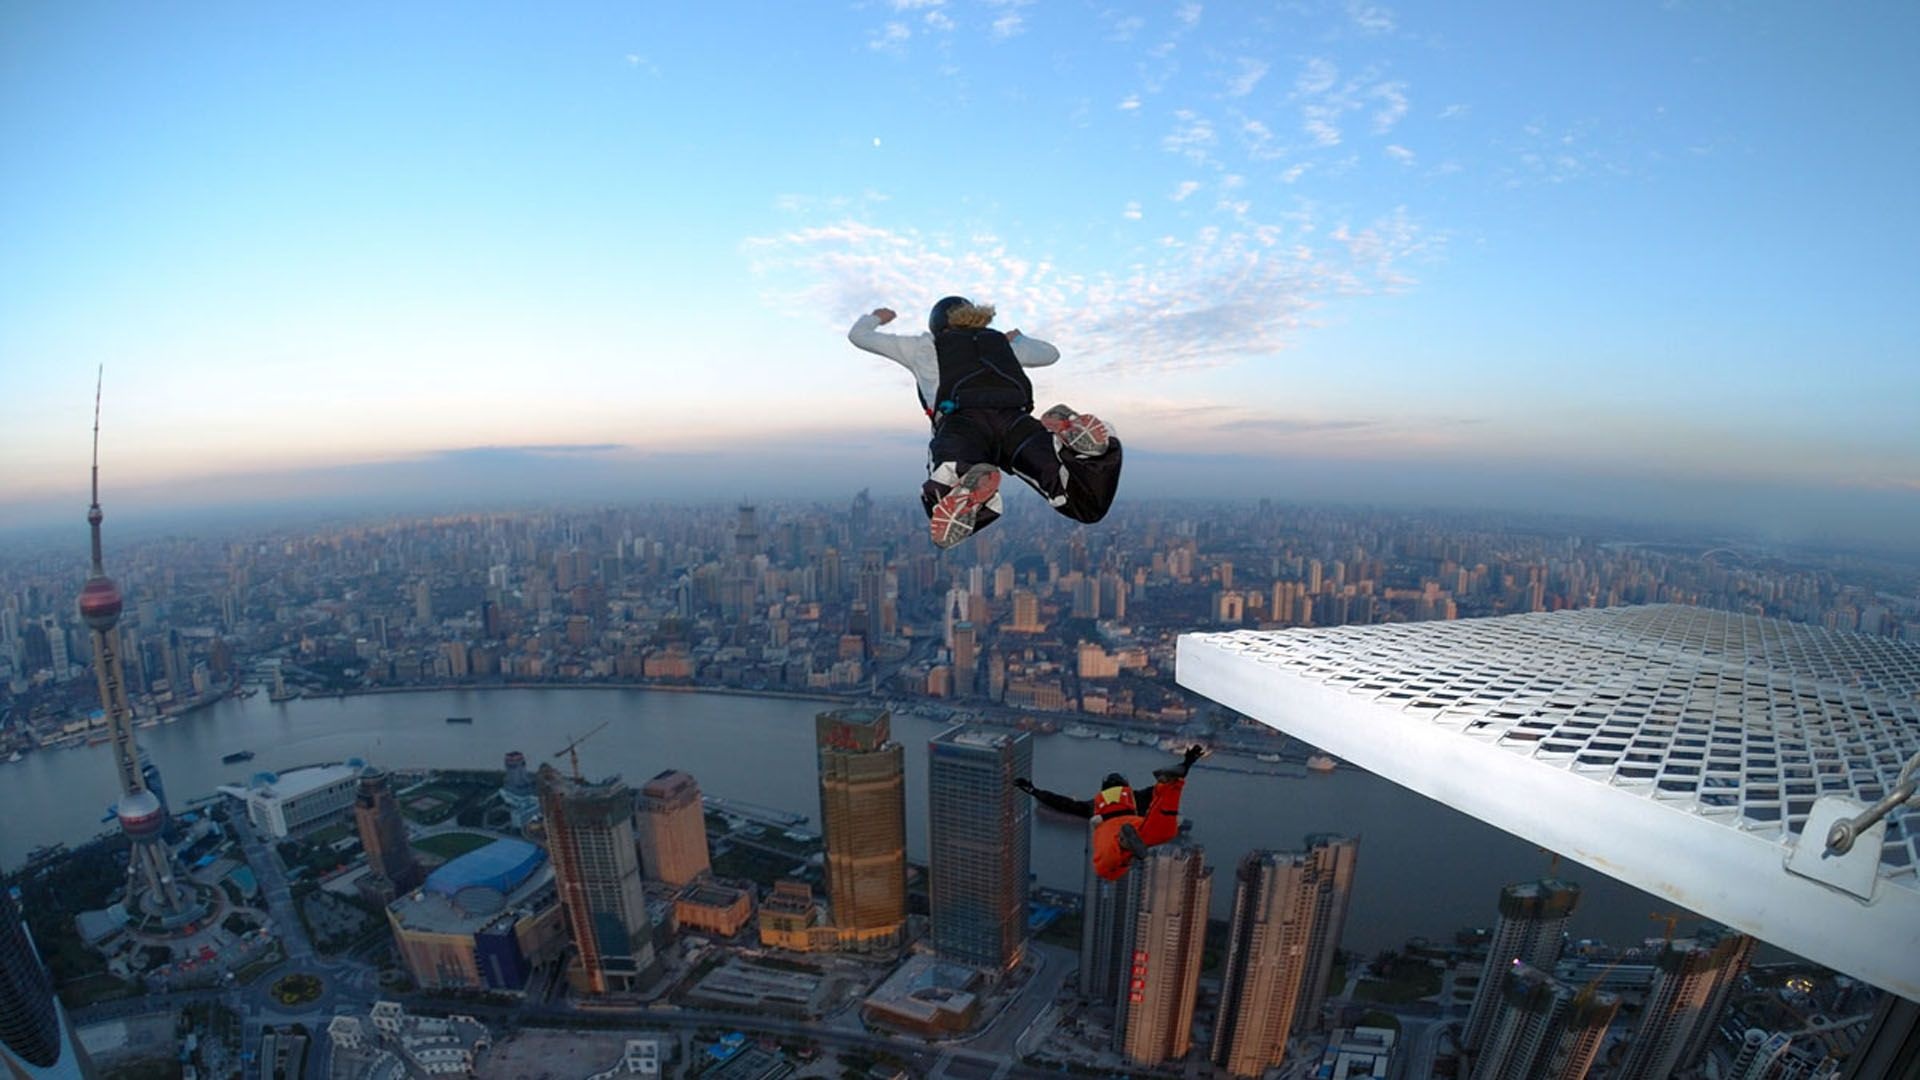 BASE Jumping: Jumping from a skyscraper, Air sport in the city, Extreme activity. 1920x1080 Full HD Background.